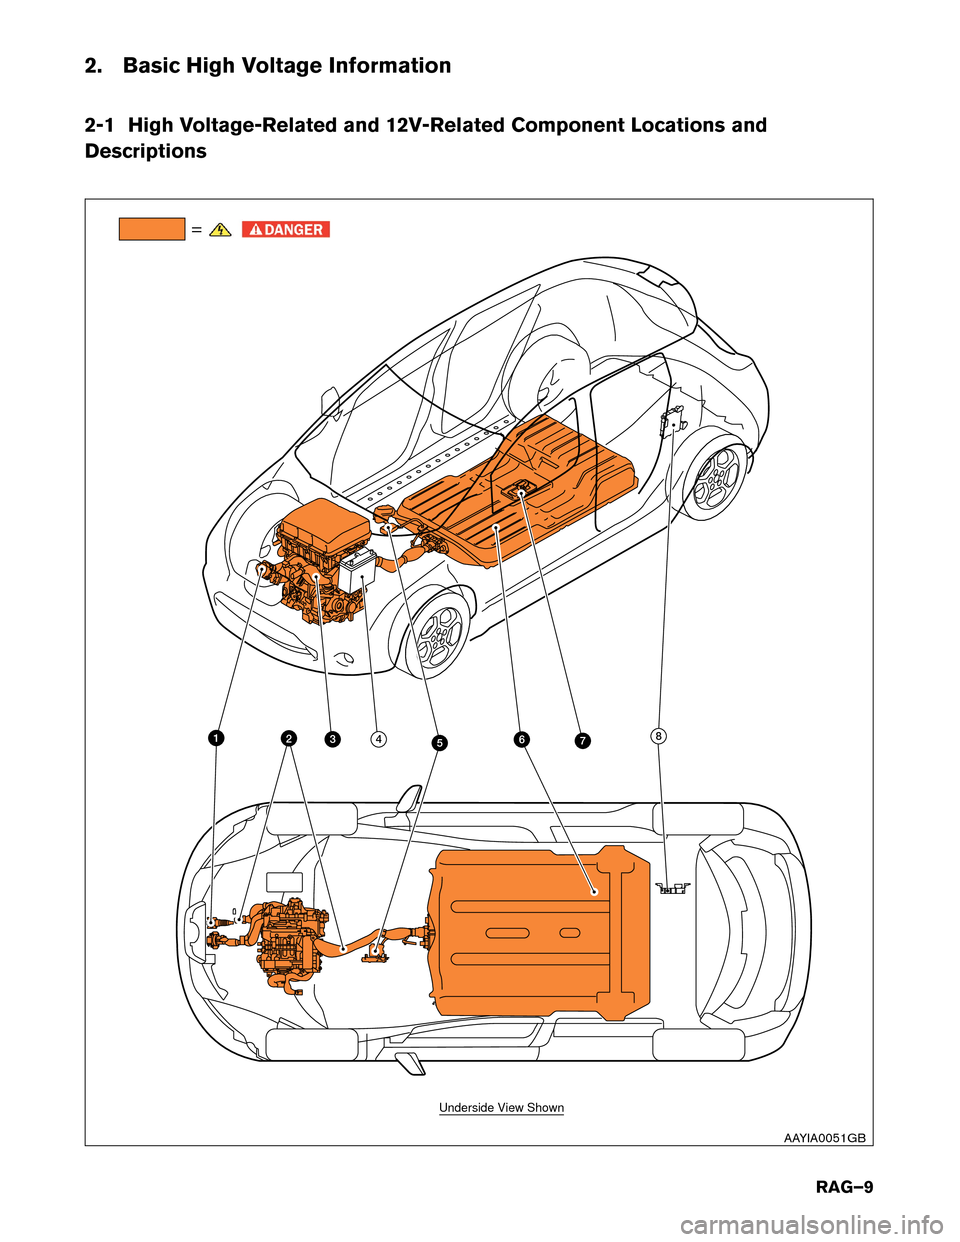 NISSAN LEAF 2015 1.G Roadside Assistance Guide 2. Basic High Voltage Information
2-1
High Voltage-Related and 12V-Related Component Locations and
Descriptions =
76
342 8
5 1
Underside View Shown
AAYIA0051GB
RAG–9  